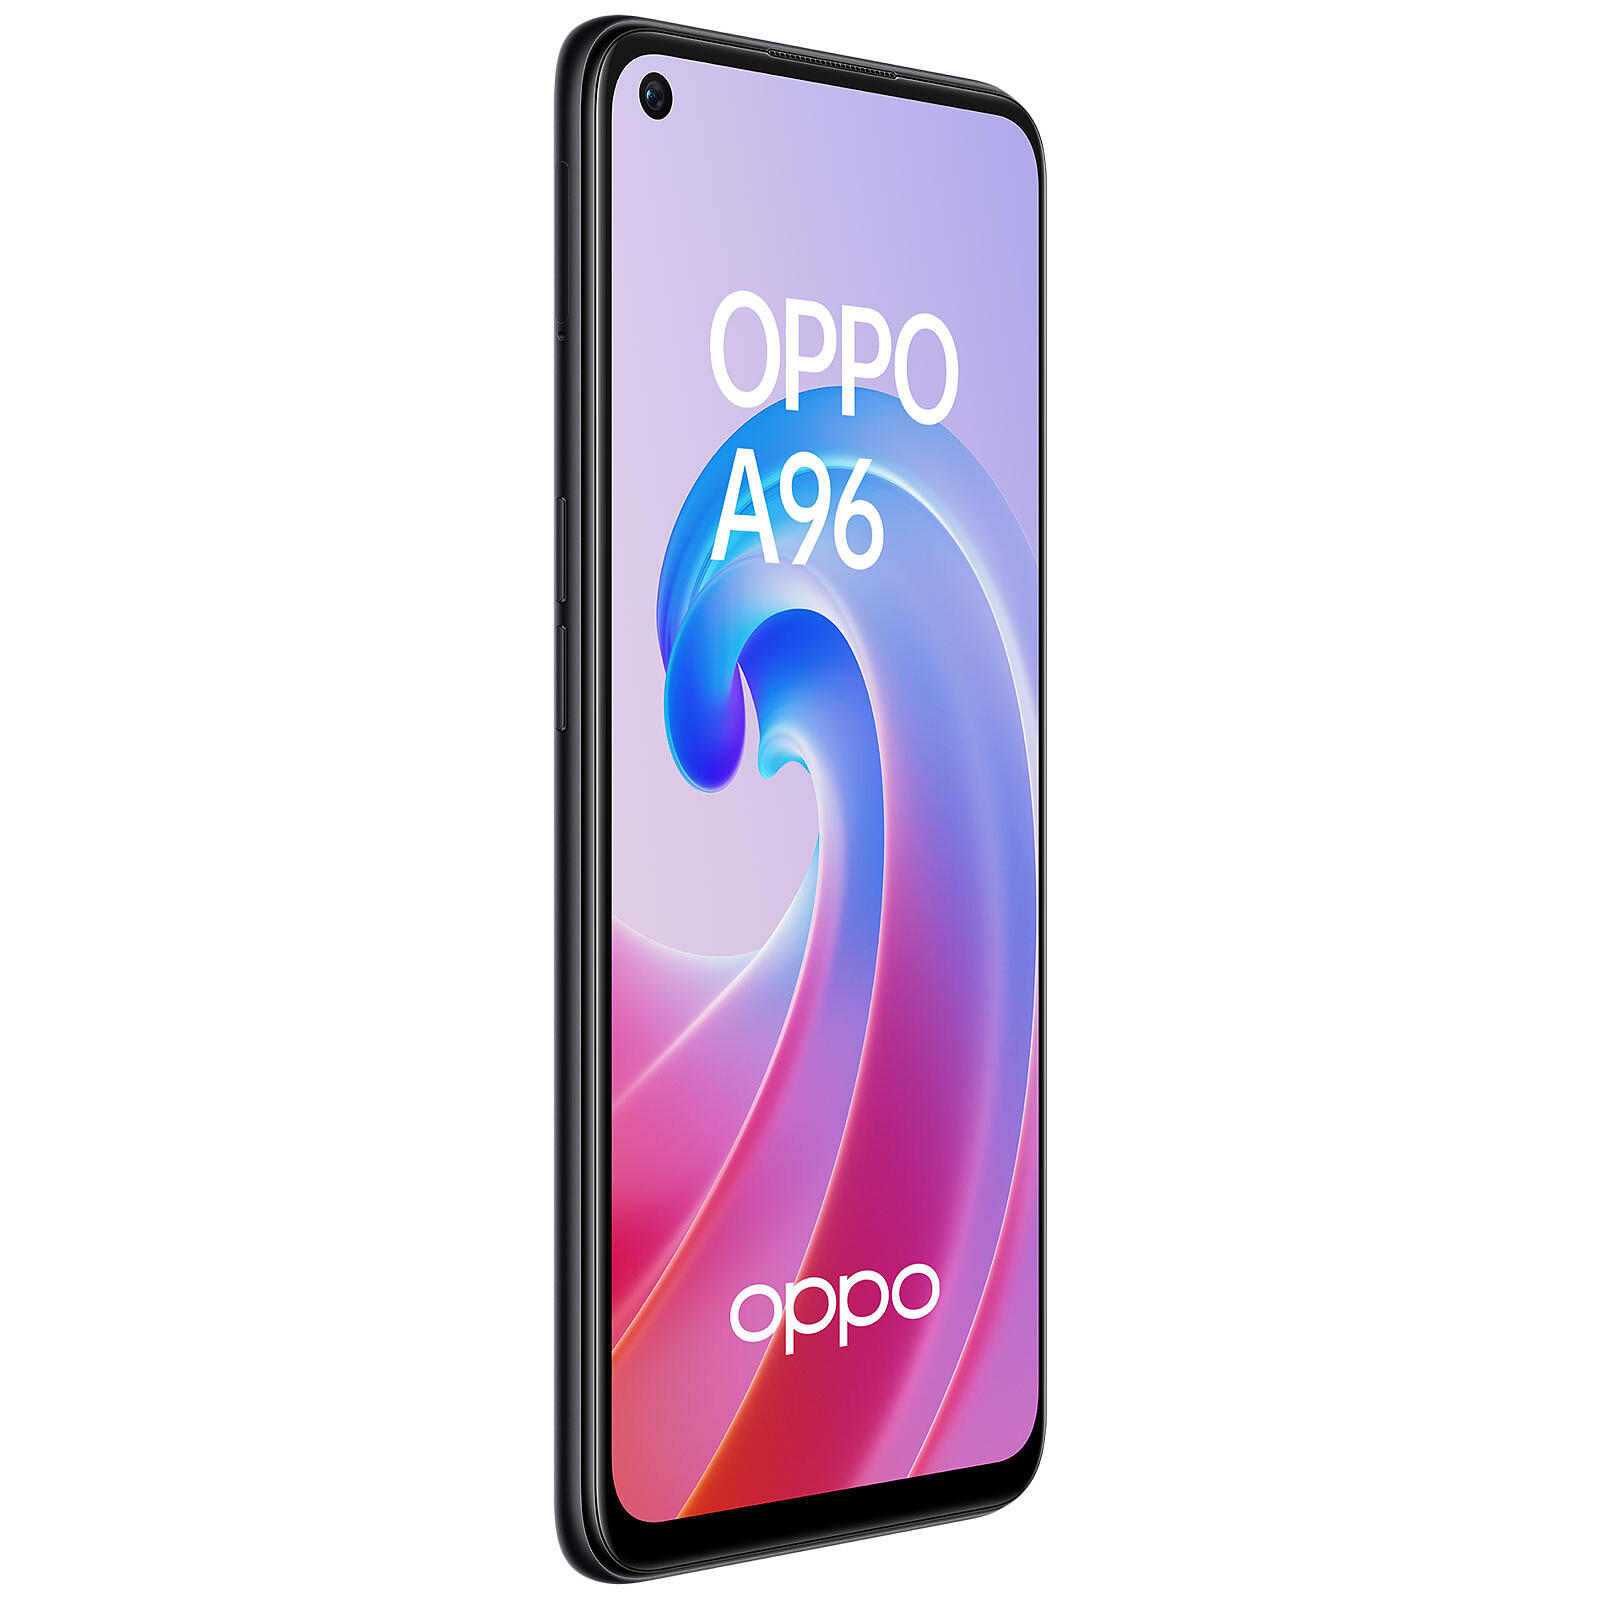 OPPO A57s Starry Black - Mobile phone & smartphone - LDLC 3-year warranty